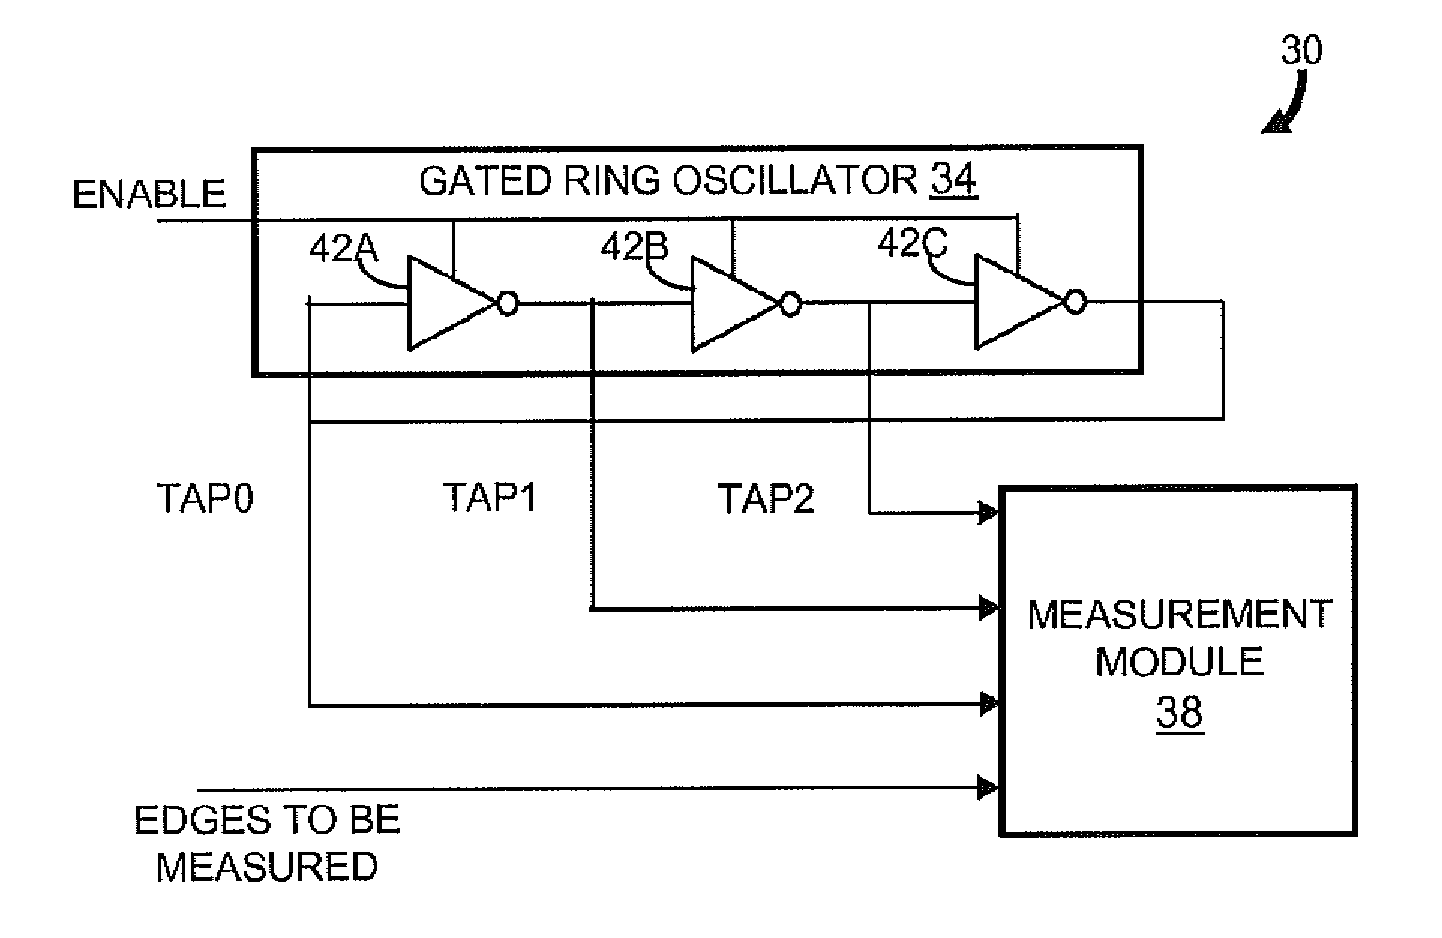 Gated ring oscillator for a time-to-digital converter with shaped quantization noise